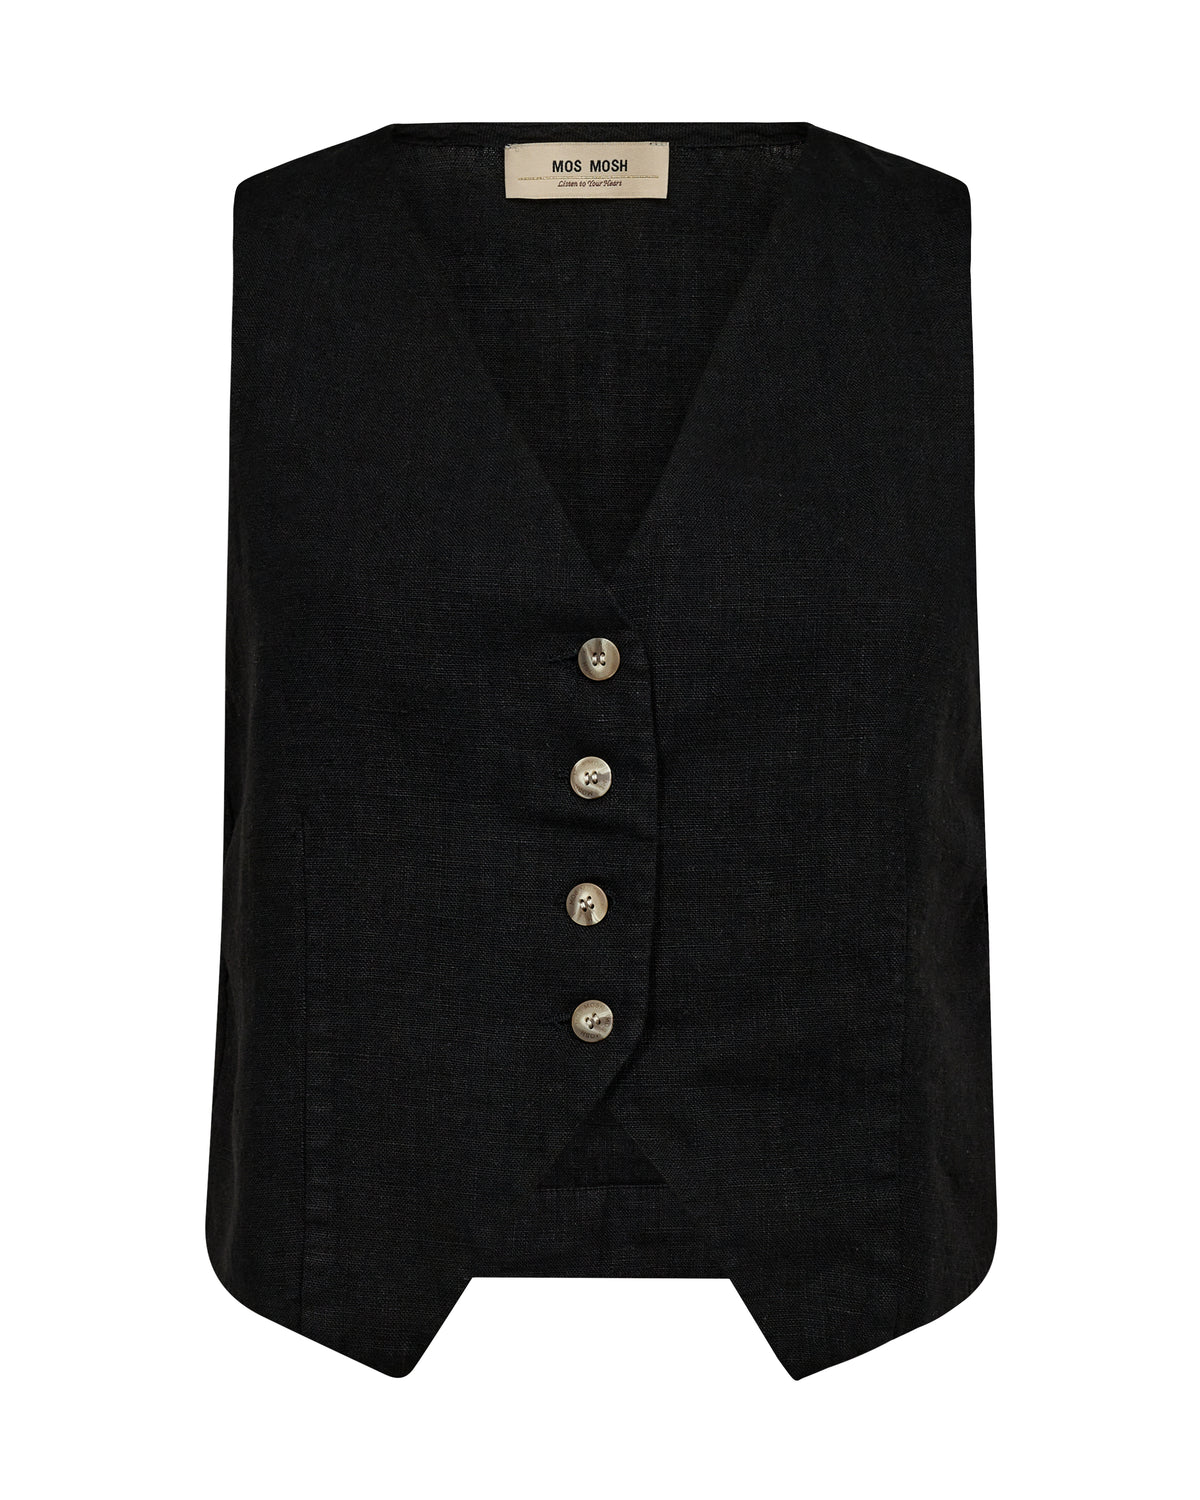 Black linen single breasted waistcoat with contrast buttons